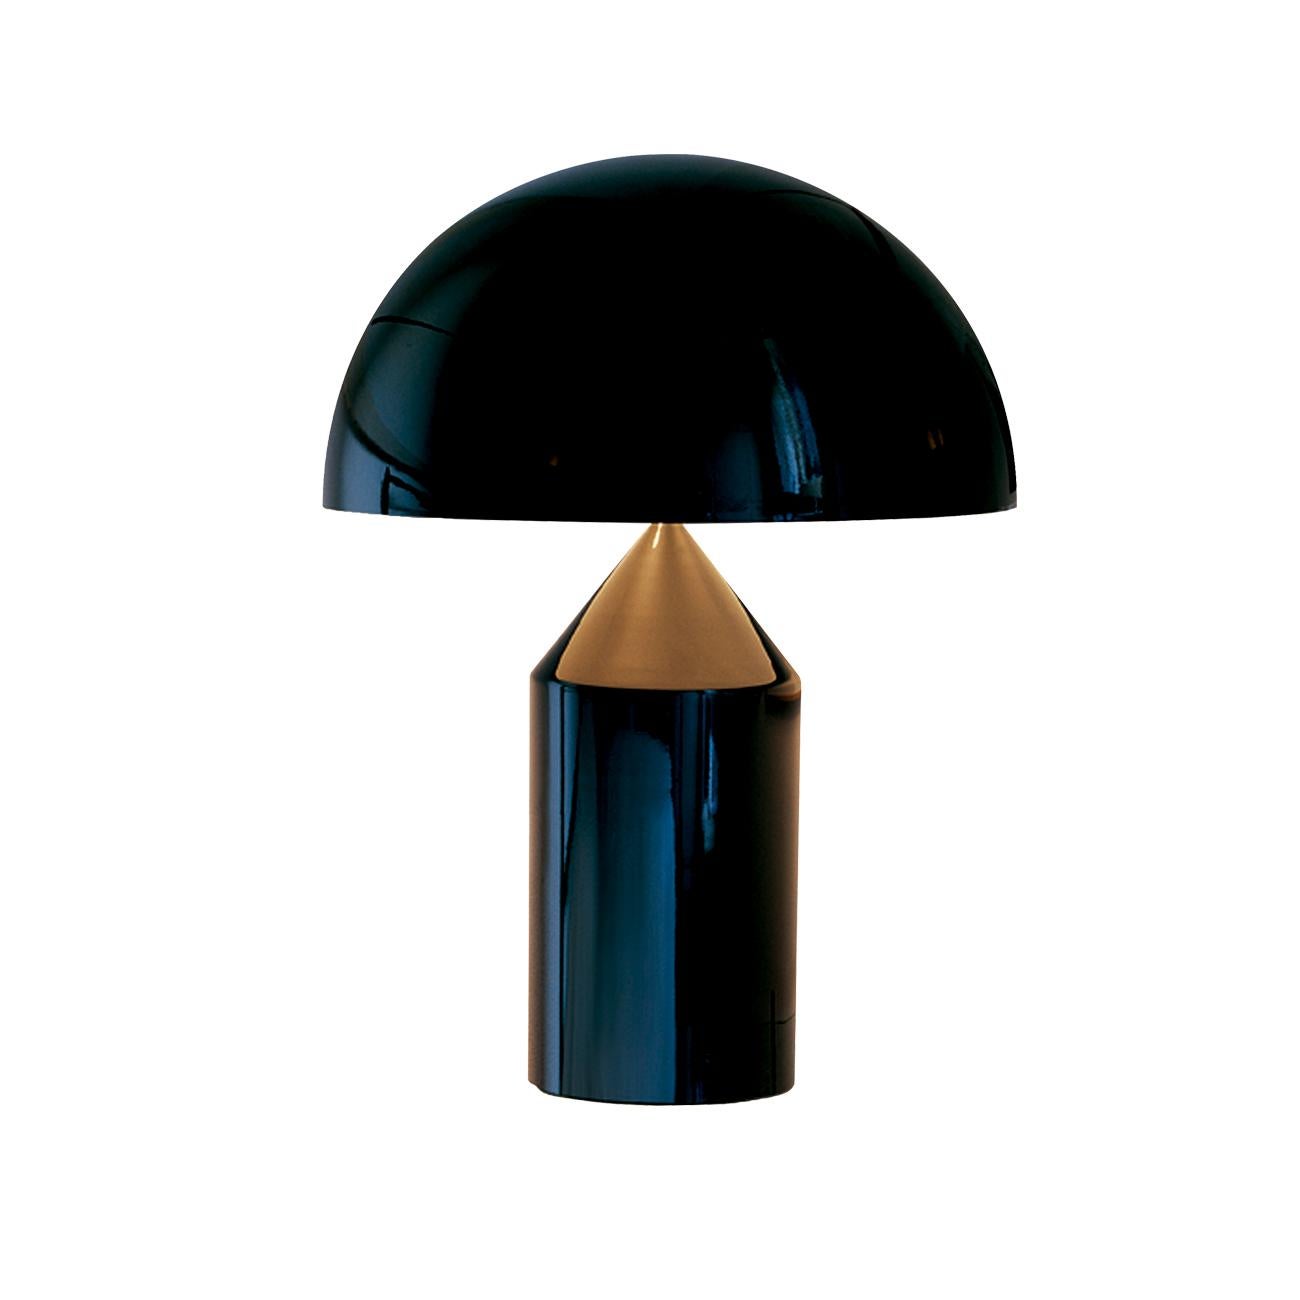 Mid-Century Modern Set of 'Atollo' Large and Small Black Table Lamp Designed by Vico Magistretti